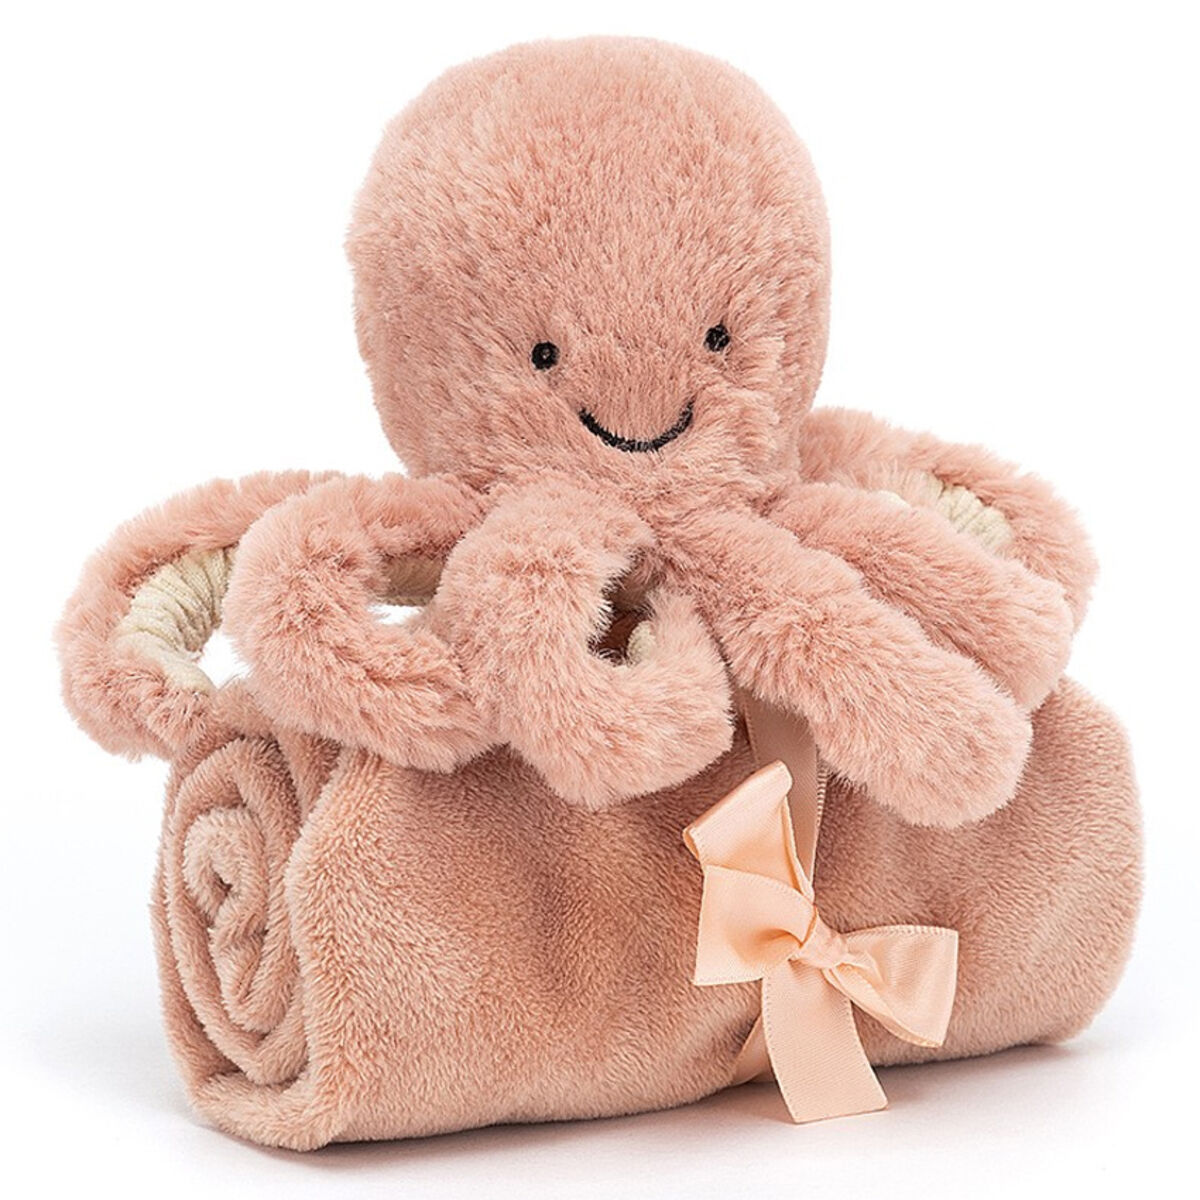 Little Jellycat Odell Octopus Soother